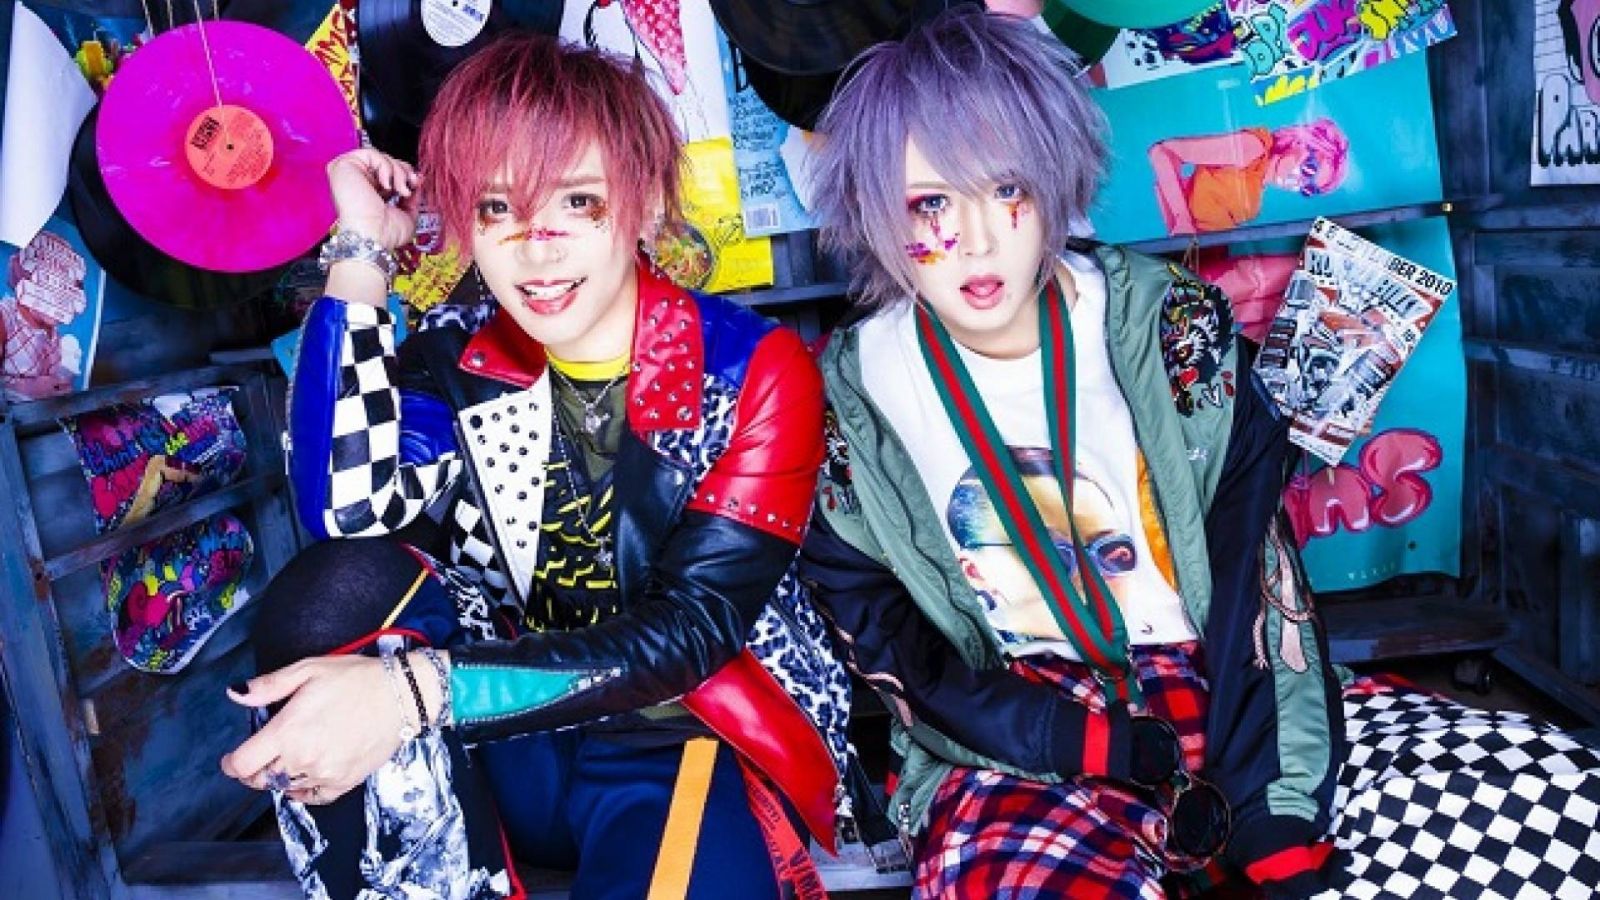 FEST VAINQUEUR and LEZARD Members Form New Visual Kei Duo © 2018 Sirene Co. All rights reserved.